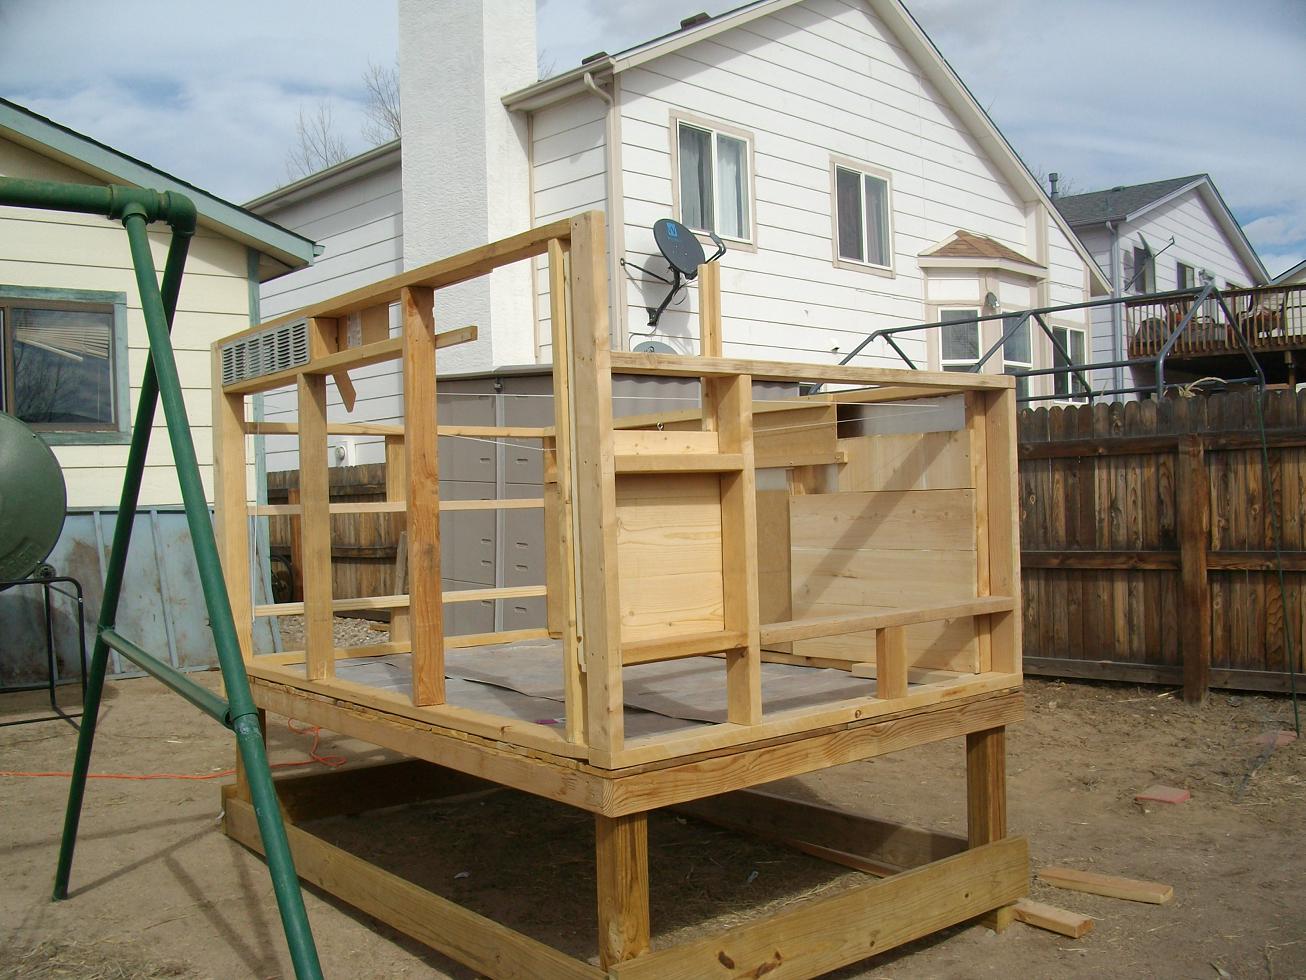 About half of the construction was done here and then the coop was moved up against the fence by sliding it on planks.